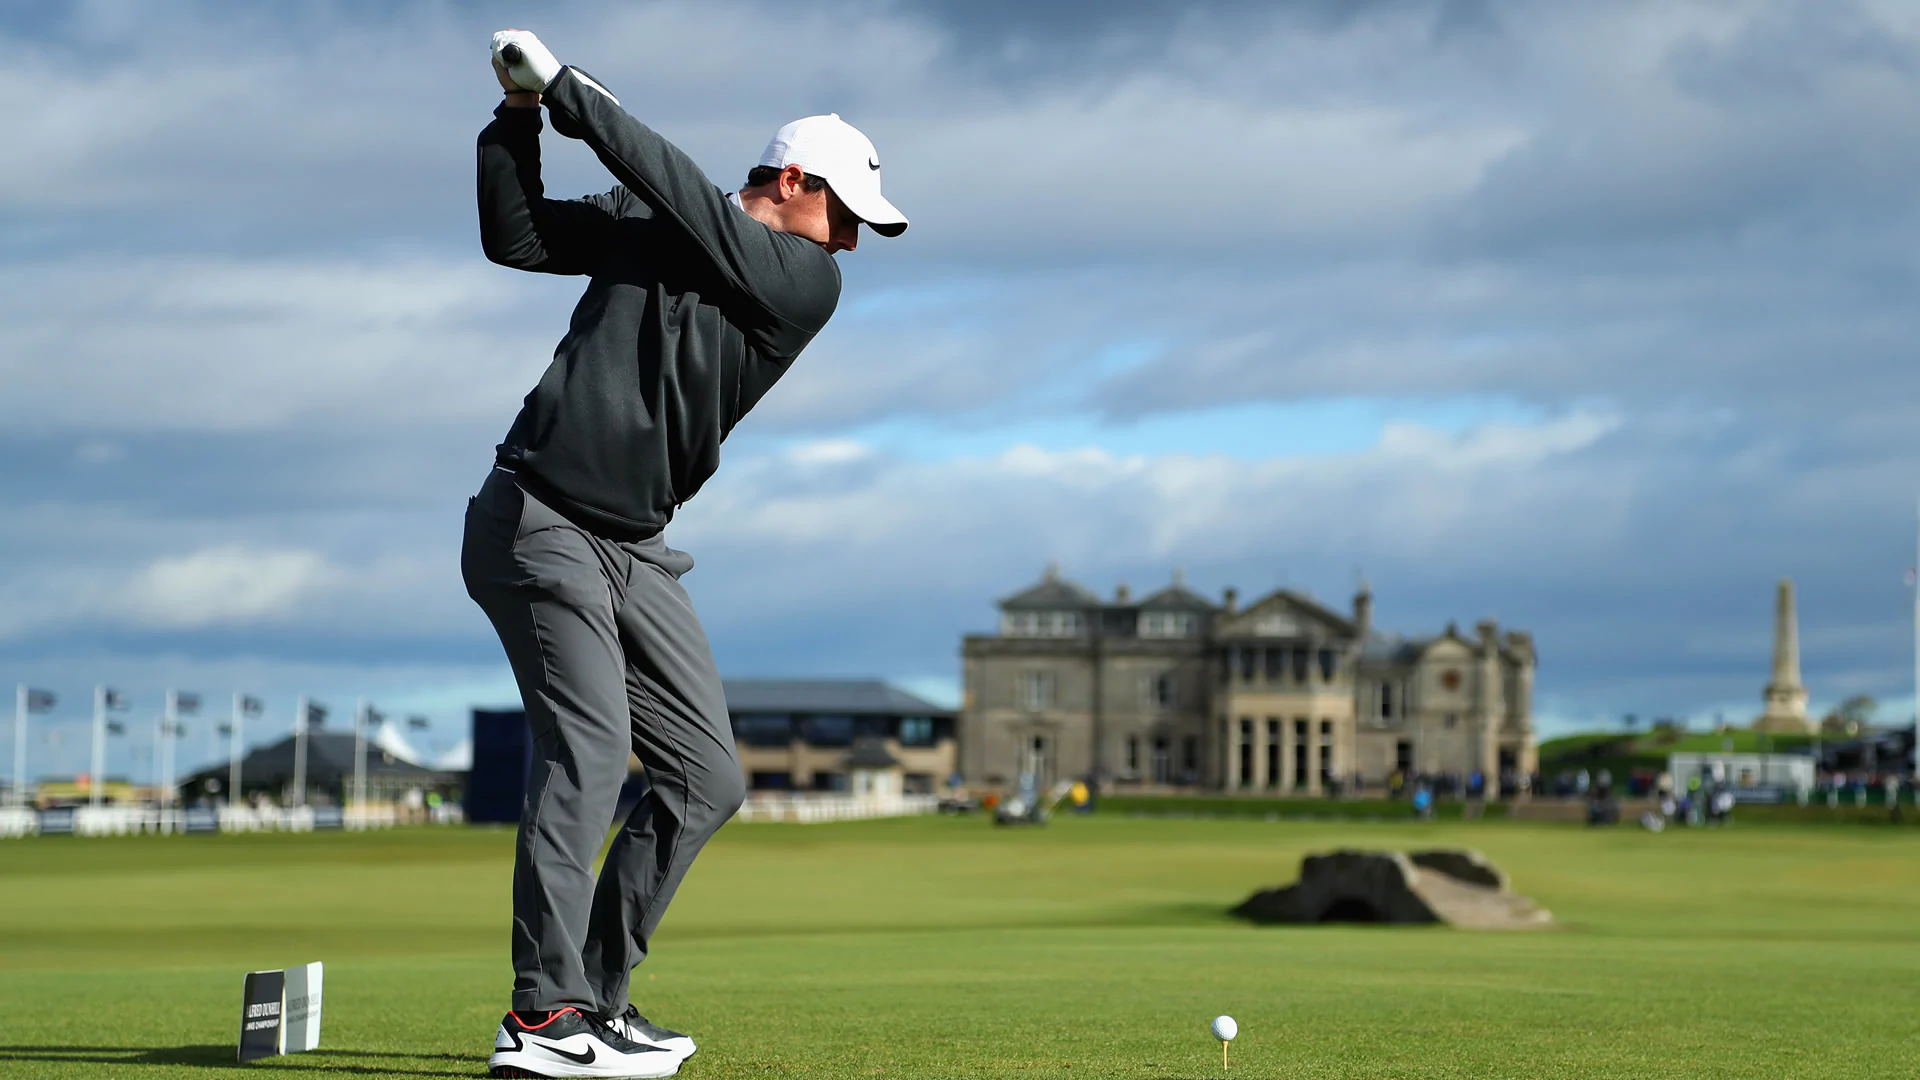 Watch: McIlroy drives 18th hole at St. Andrews